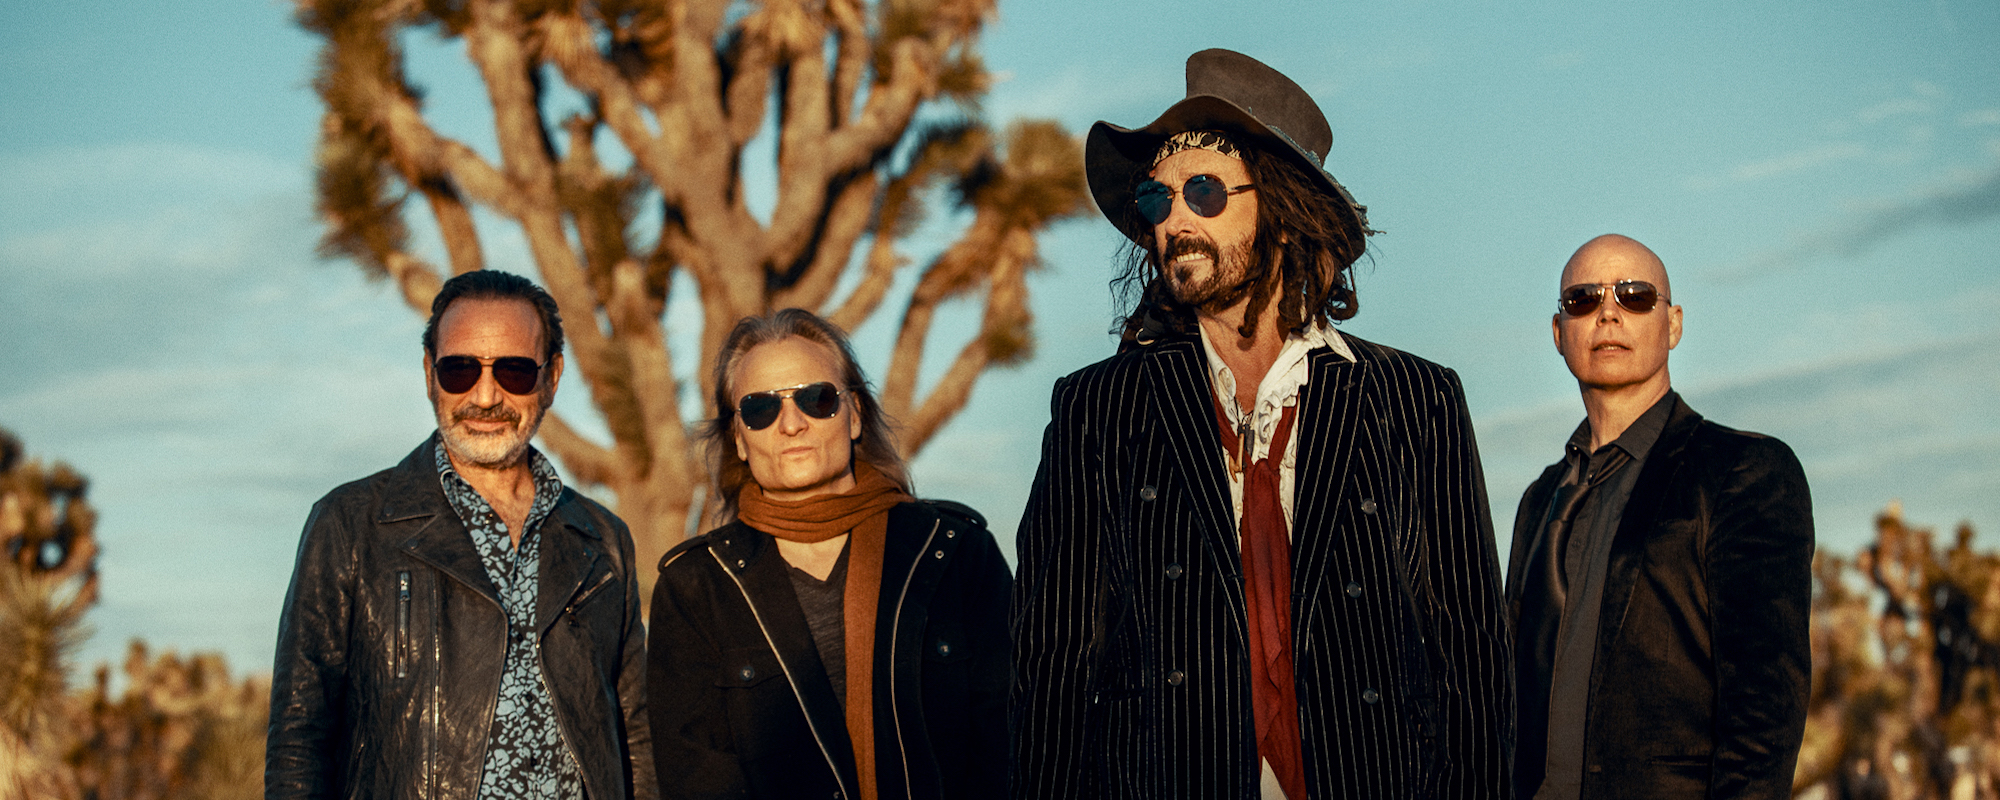 Mike Campbell Reunites with Tom Petty and the Heartbreakers Drummer Stan Lynch on Dirty Knobs Tour